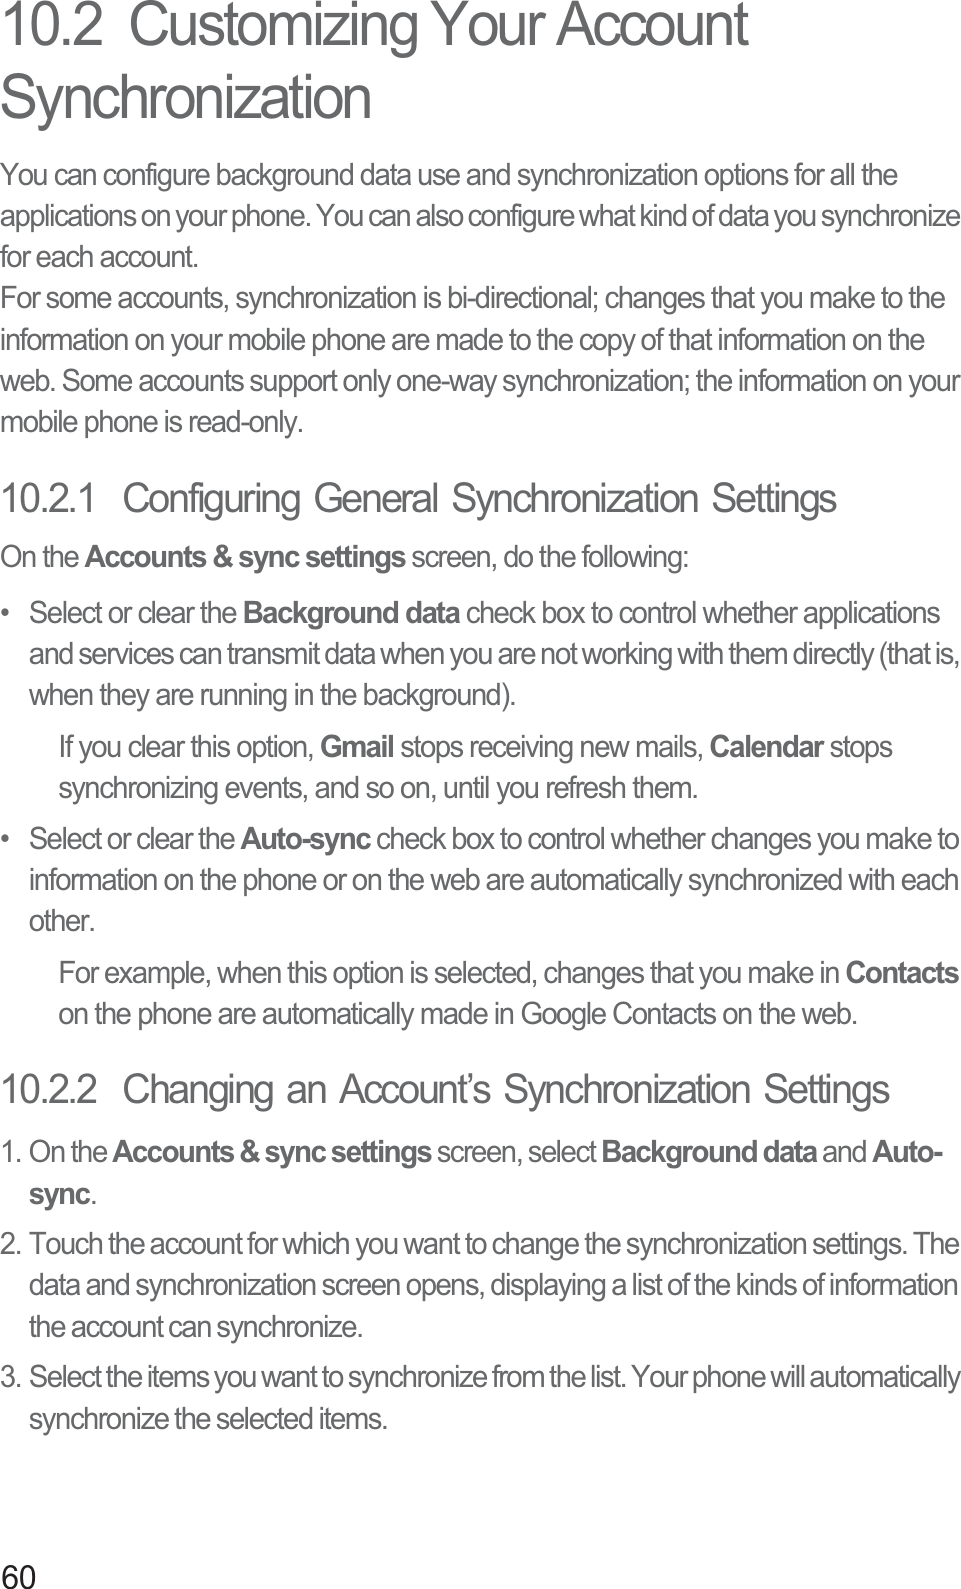 6010.2  Customizing Your Account SynchronizationYou can configure background data use and synchronization options for all the applications on your phone. You can also configure what kind of data you synchronize for each account.For some accounts, synchronization is bi-directional; changes that you make to the information on your mobile phone are made to the copy of that information on the web. Some accounts support only one-way synchronization; the information on your mobile phone is read-only.10.2.1  Configuring General Synchronization SettingsOn the Accounts &amp; sync settings screen, do the following:•  Select or clear the Background data check box to control whether applications and services can transmit data when you are not working with them directly (that is, when they are running in the background).If you clear this option, Gmail stops receiving new mails, Calendar stops synchronizing events, and so on, until you refresh them.•  Select or clear the Auto-sync check box to control whether changes you make to information on the phone or on the web are automatically synchronized with each other.For example, when this option is selected, changes that you make in Contactson the phone are automatically made in Google Contacts on the web.10.2.2  Changing an Account’s Synchronization Settings1. On the Accounts &amp; sync settings screen, select Background data and Auto-sync.2. Touch the account for which you want to change the synchronization settings. The data and synchronization screen opens, displaying a list of the kinds of information the account can synchronize.3. Select the items you want to synchronize from the list. Your phone will automatically synchronize the selected items. 